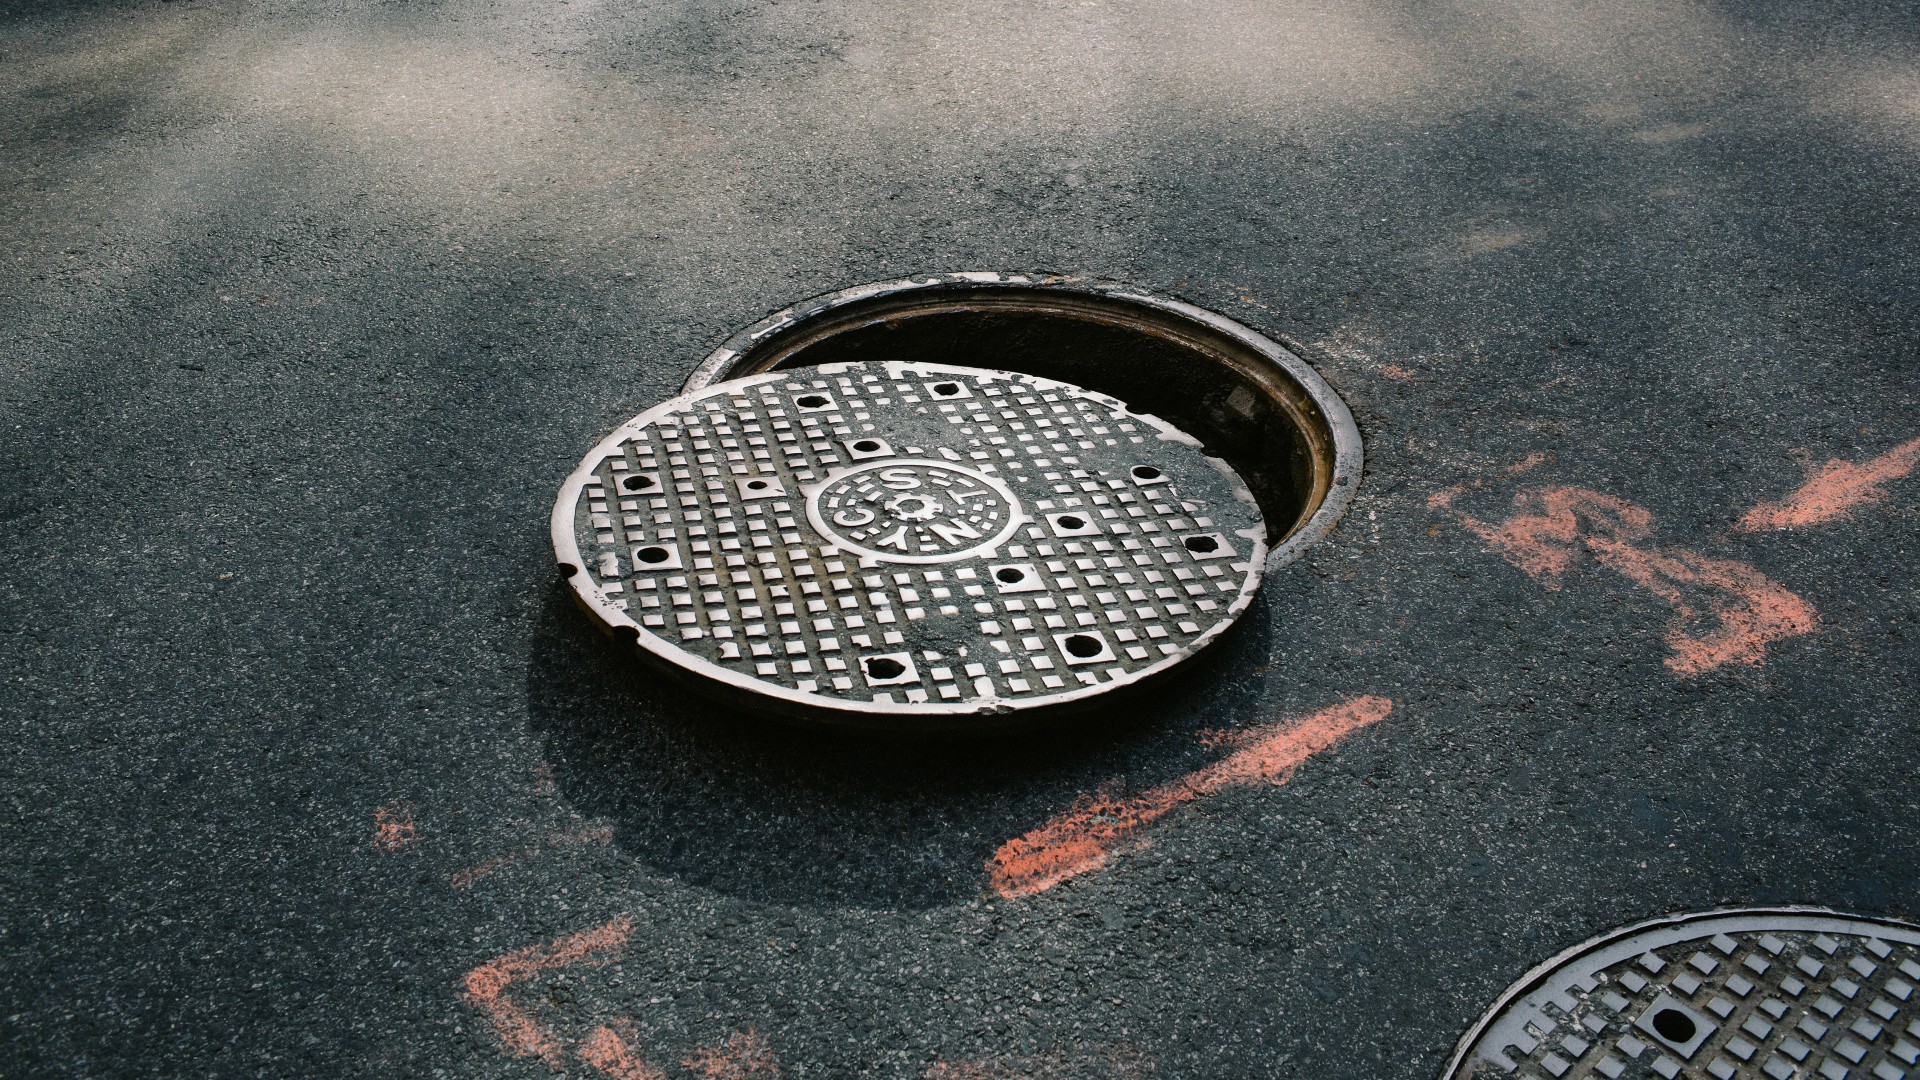 Why Are Manhole Covers Round? | Live Science